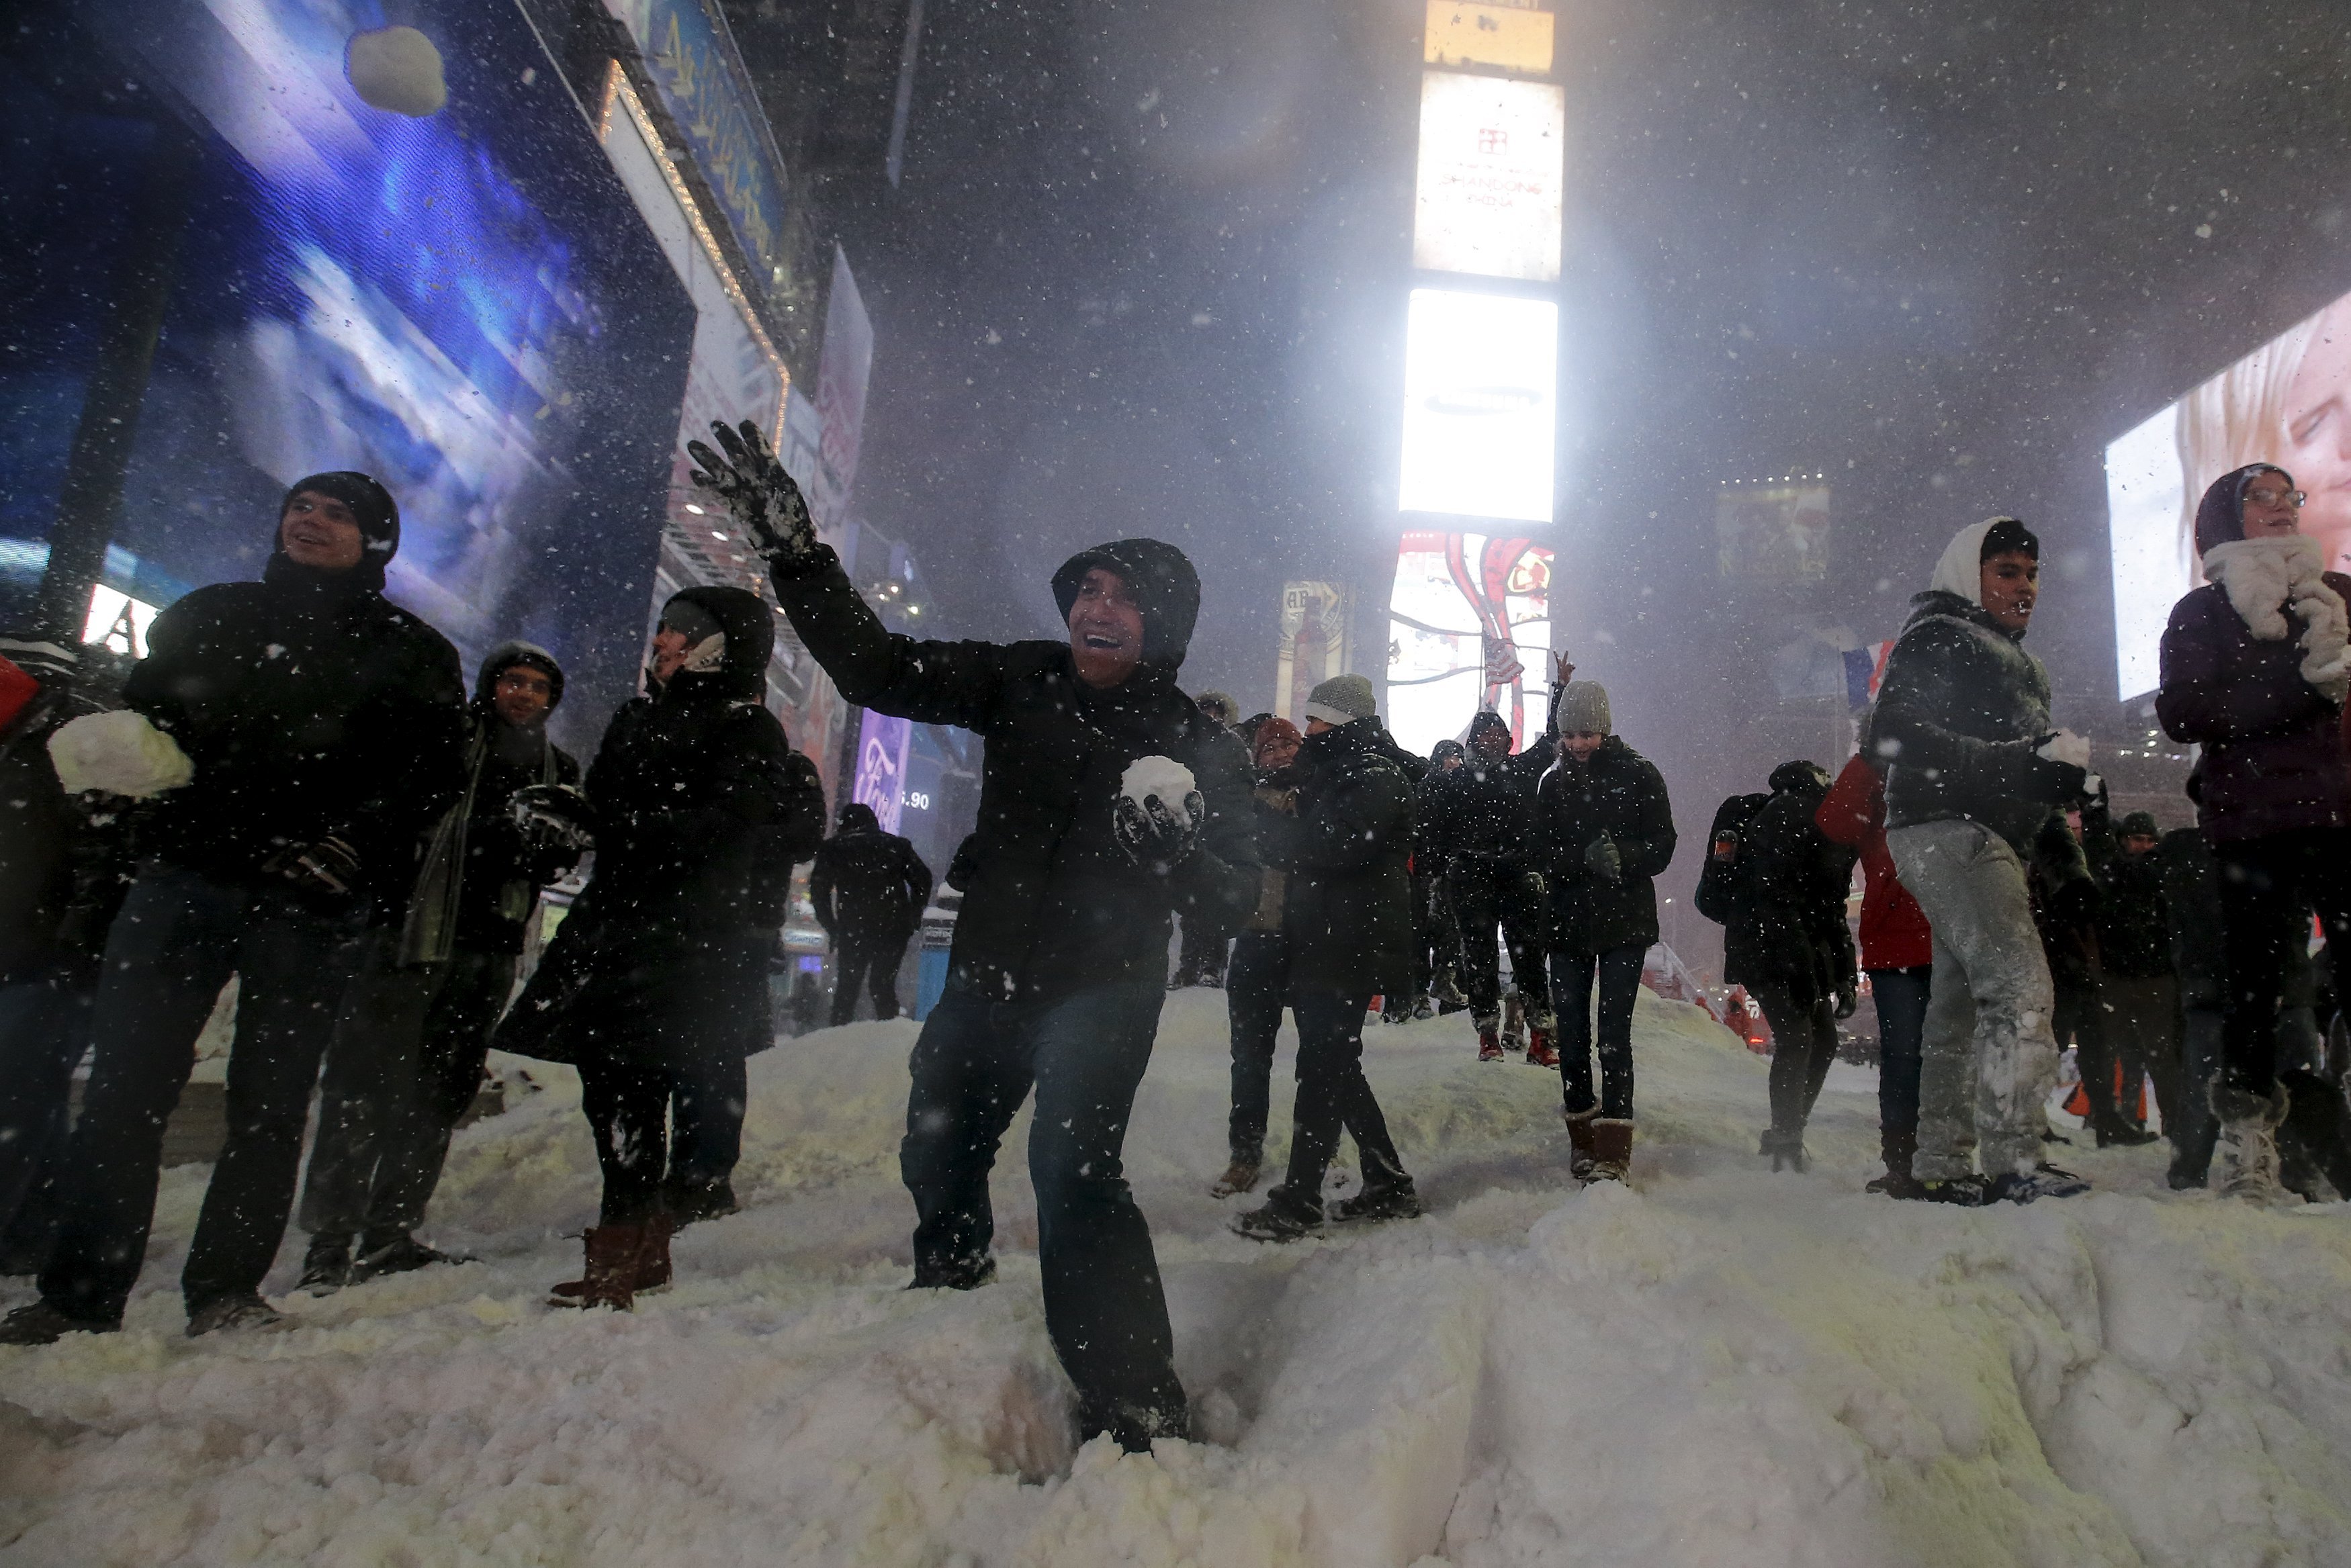 Dozens of people take part in an impromptu snow ball fight in Times Square in New York City on Jan. 23, 2016.